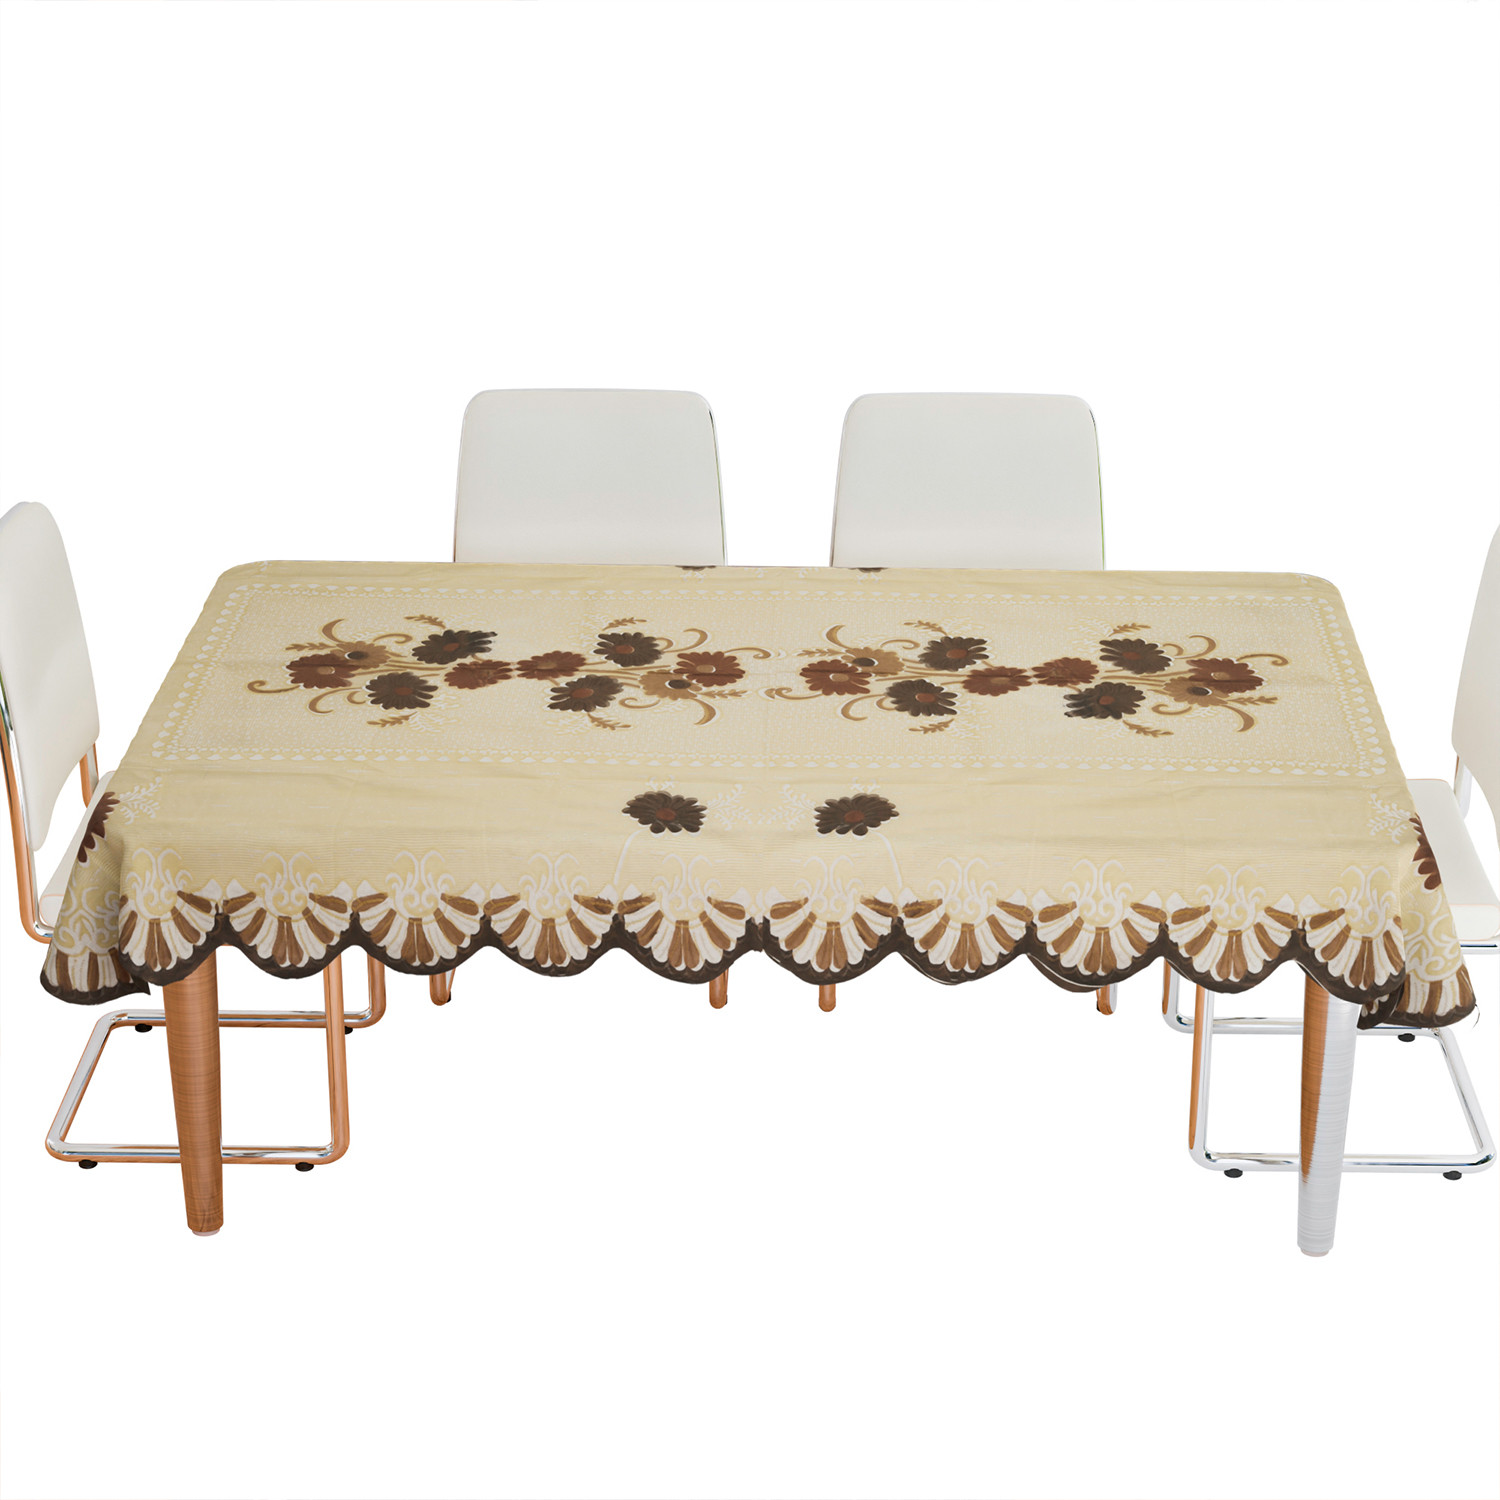 Kuber Industries Dining Table Cover | Flower Design Dining Table Cover | Shinning Net Dining Table Cover | Tablecloth for Dining Area | Home Decor | 60x90 | Cream